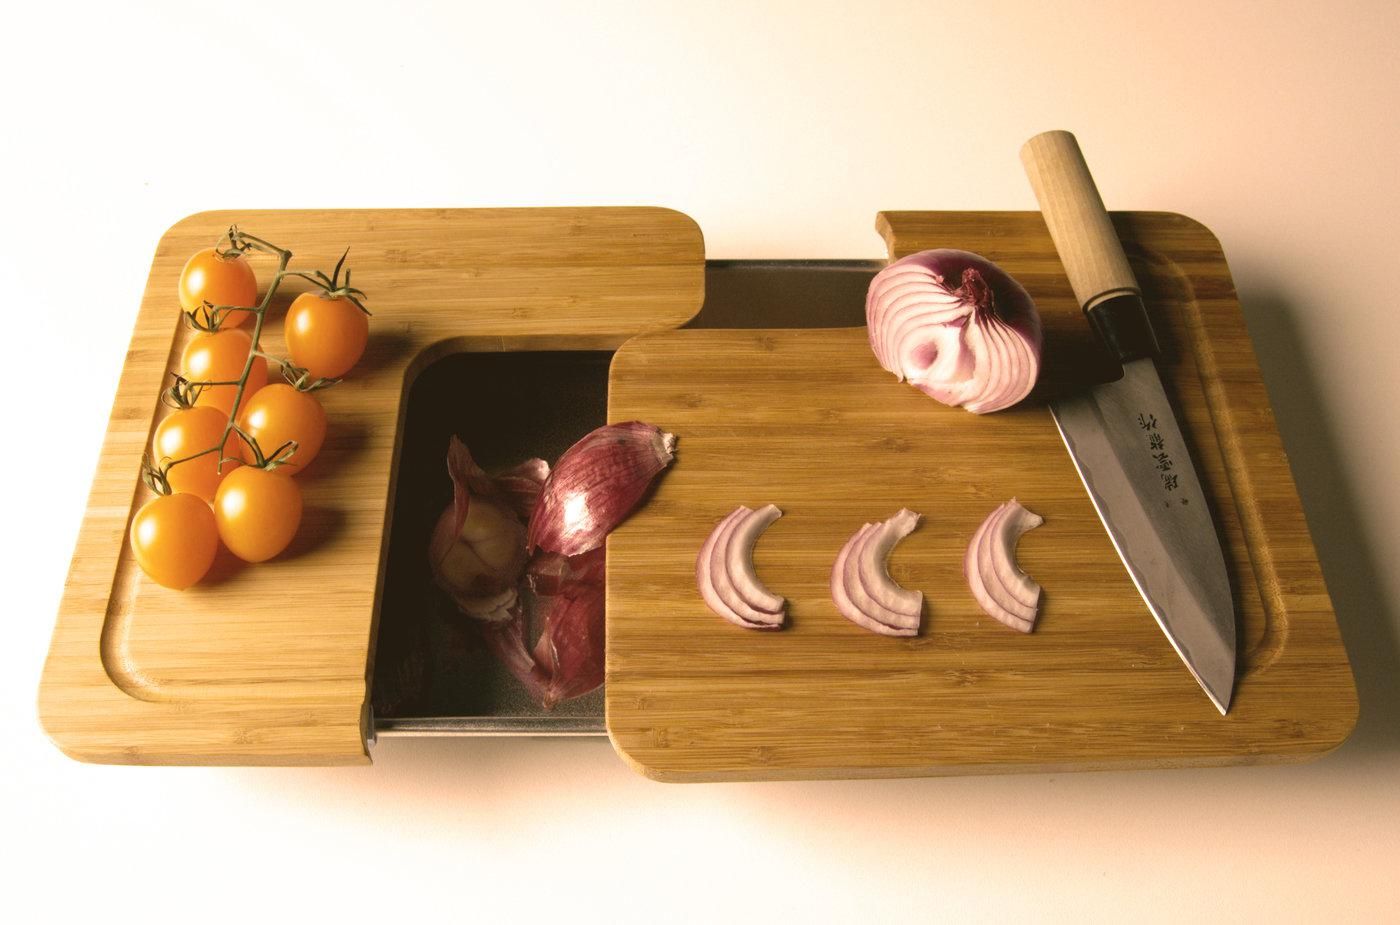 The Different Types Of Cool Wooden Serving Board Designs